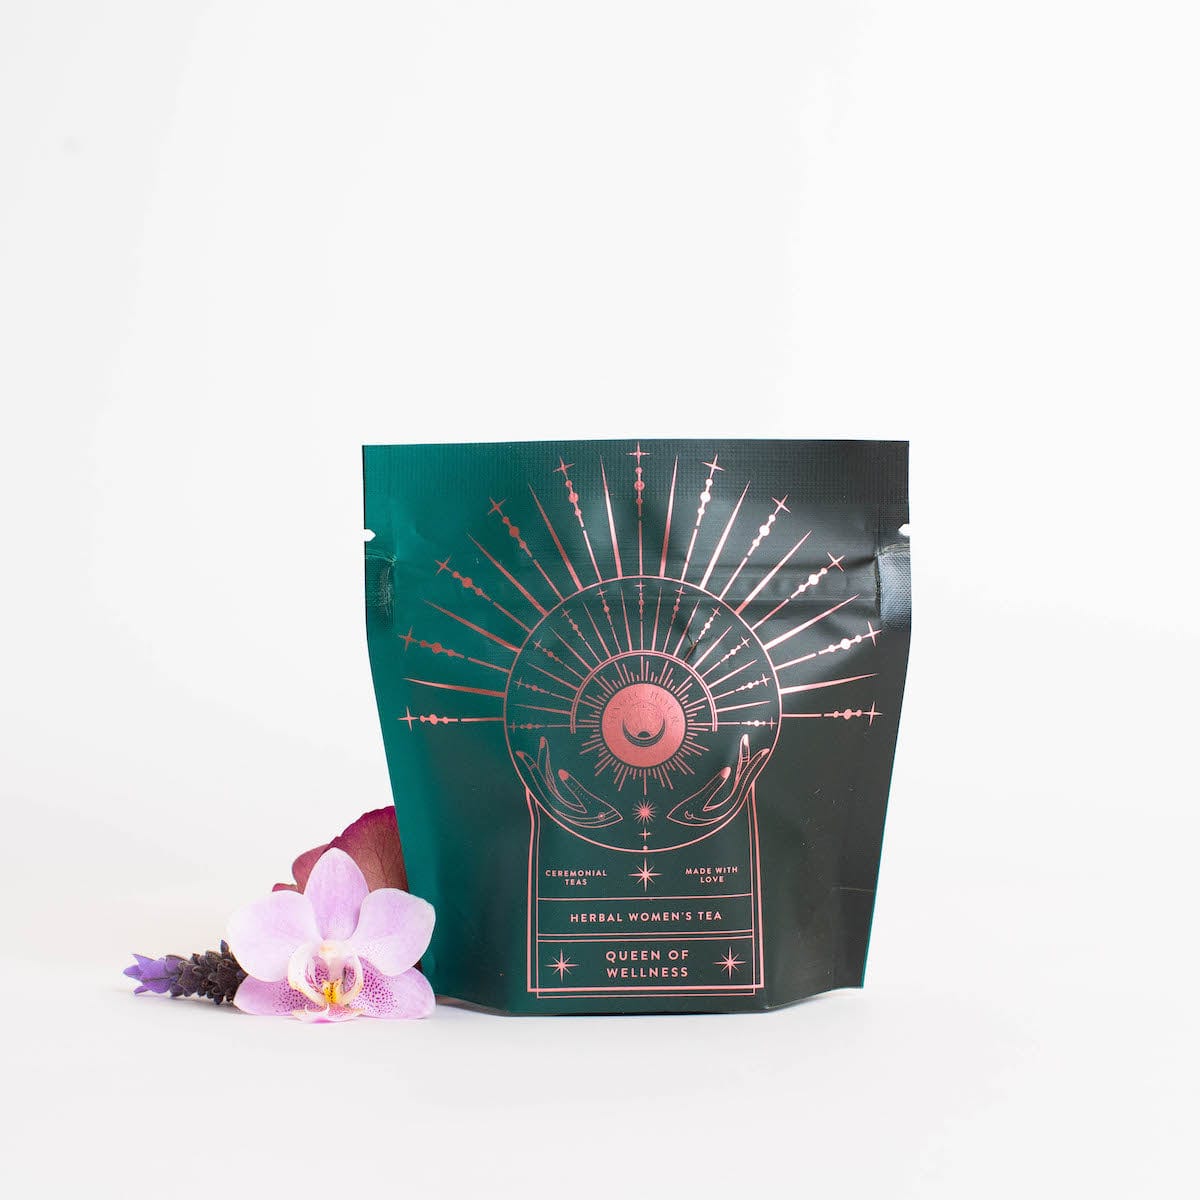 A teal and black package with a celestial design, labeled &quot;Queen of Wellness: Women&#39;s Hormone Balancing Tea for PMS, Healthy Cycles &amp; Menopause,&quot; offers an enchanting experience. Adorned with a golden sunburst and crescent moon, this Magic Hour tea is surrounded by an orchid bloom and lavender sprigs on a white background.